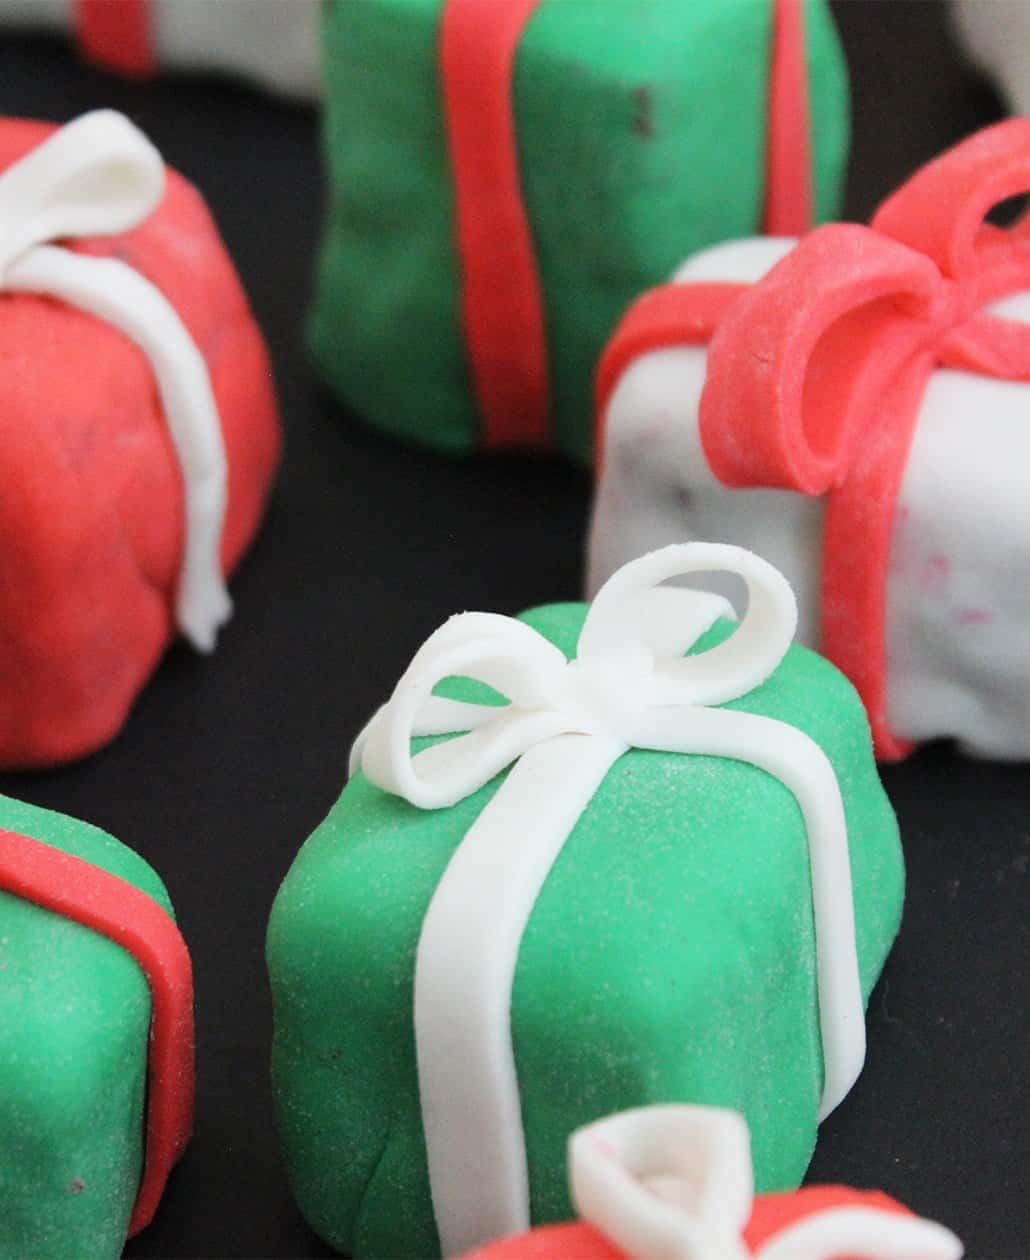 These mini Christmas Present Cakes are perfect for entertaining over the festive season! A simple sponge and buttercream recipe they are perfect for a novice baker - like me! Mix and match vibrant colours for full on Christmas appeal! Christmas Cake | Christmas Party Food | Sponge Christmas cakes | Party Food #christmascake #partyfood #festivedessert #christmasdessert